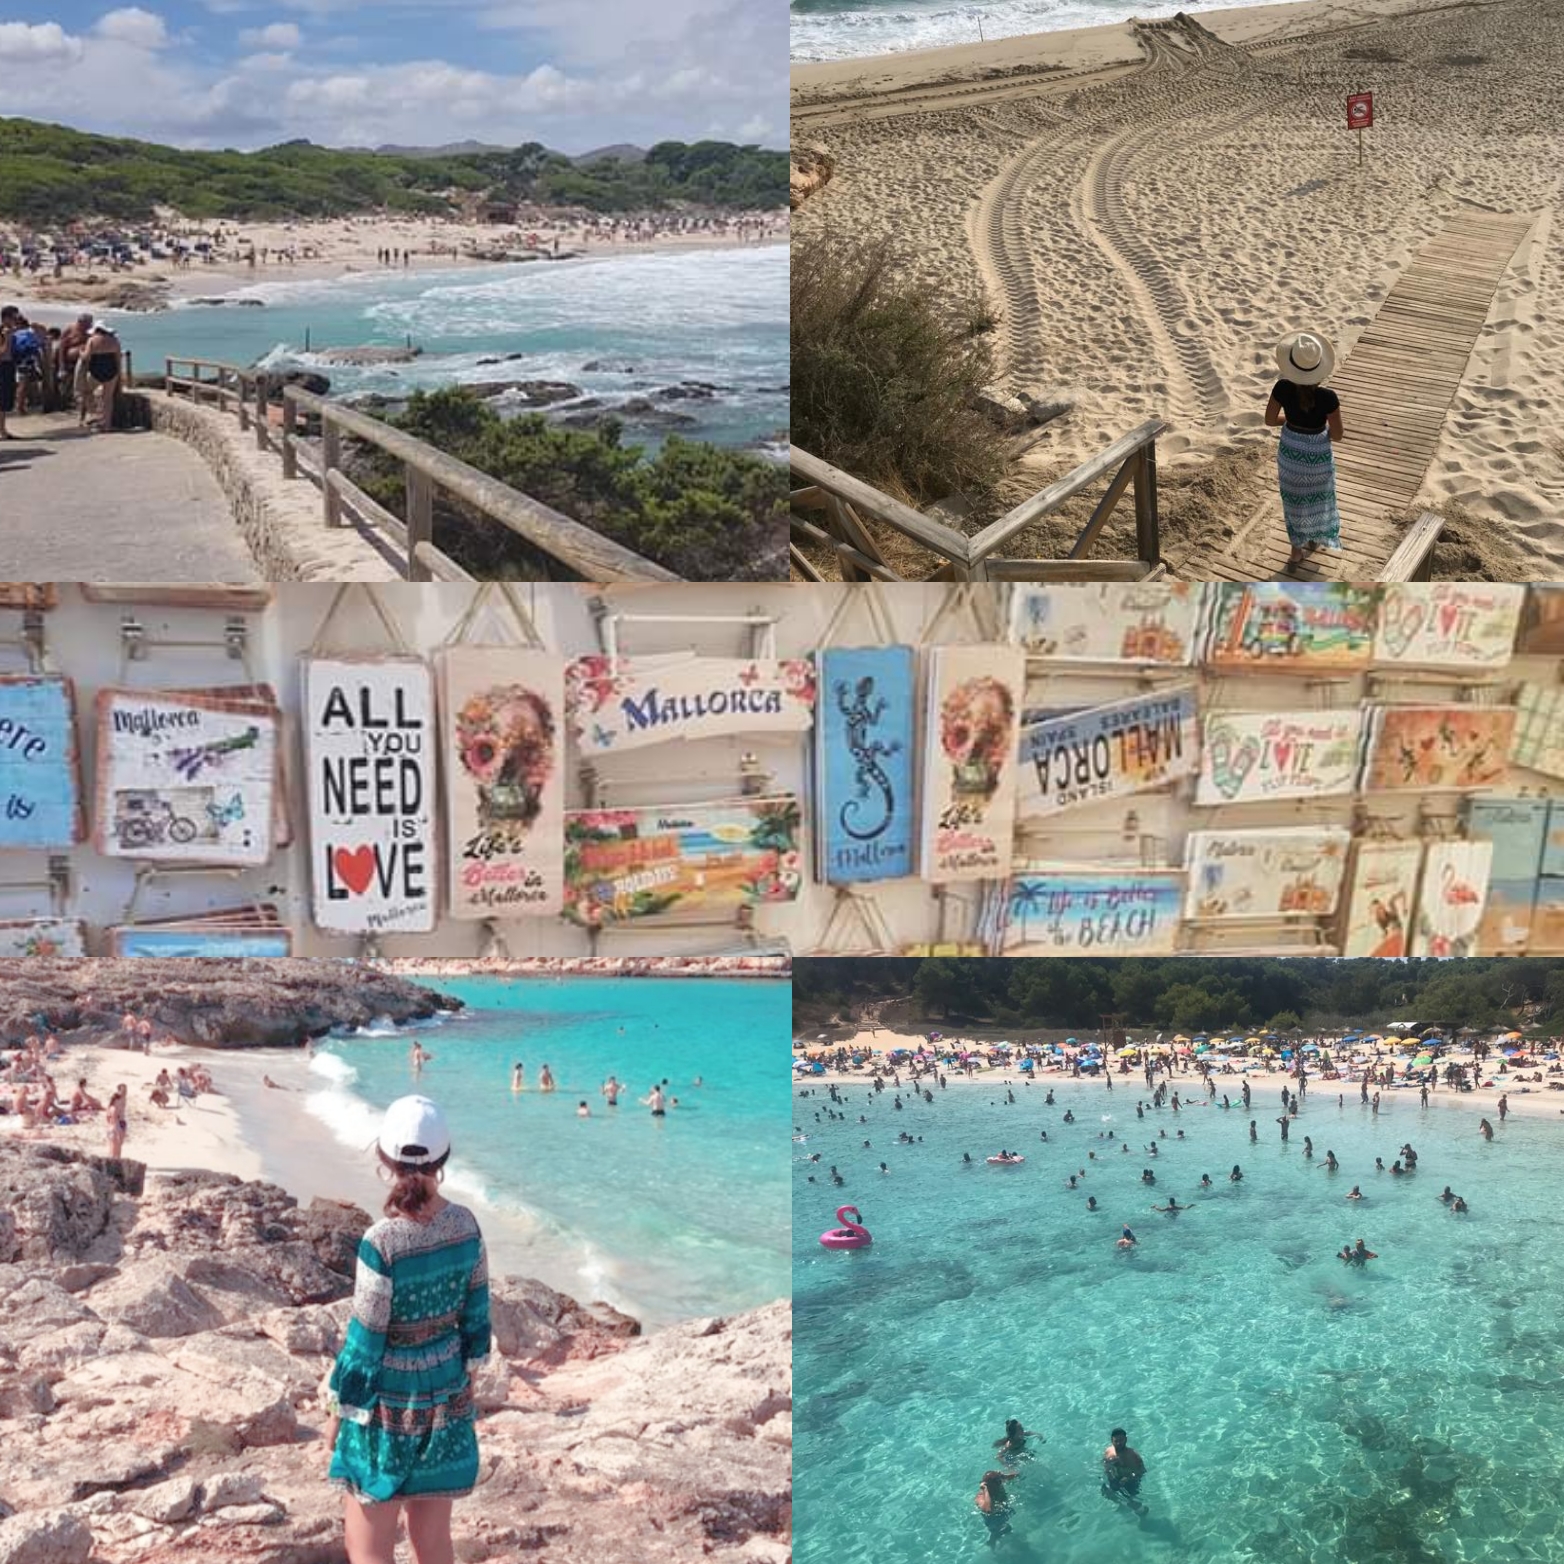 [:it]Vacanze a maiorca: le cose più belle da vedere [:en]HOLIDAYS IN MAJORCA: THE MOST BEAUTIFUL THINGS TO SEE[:]